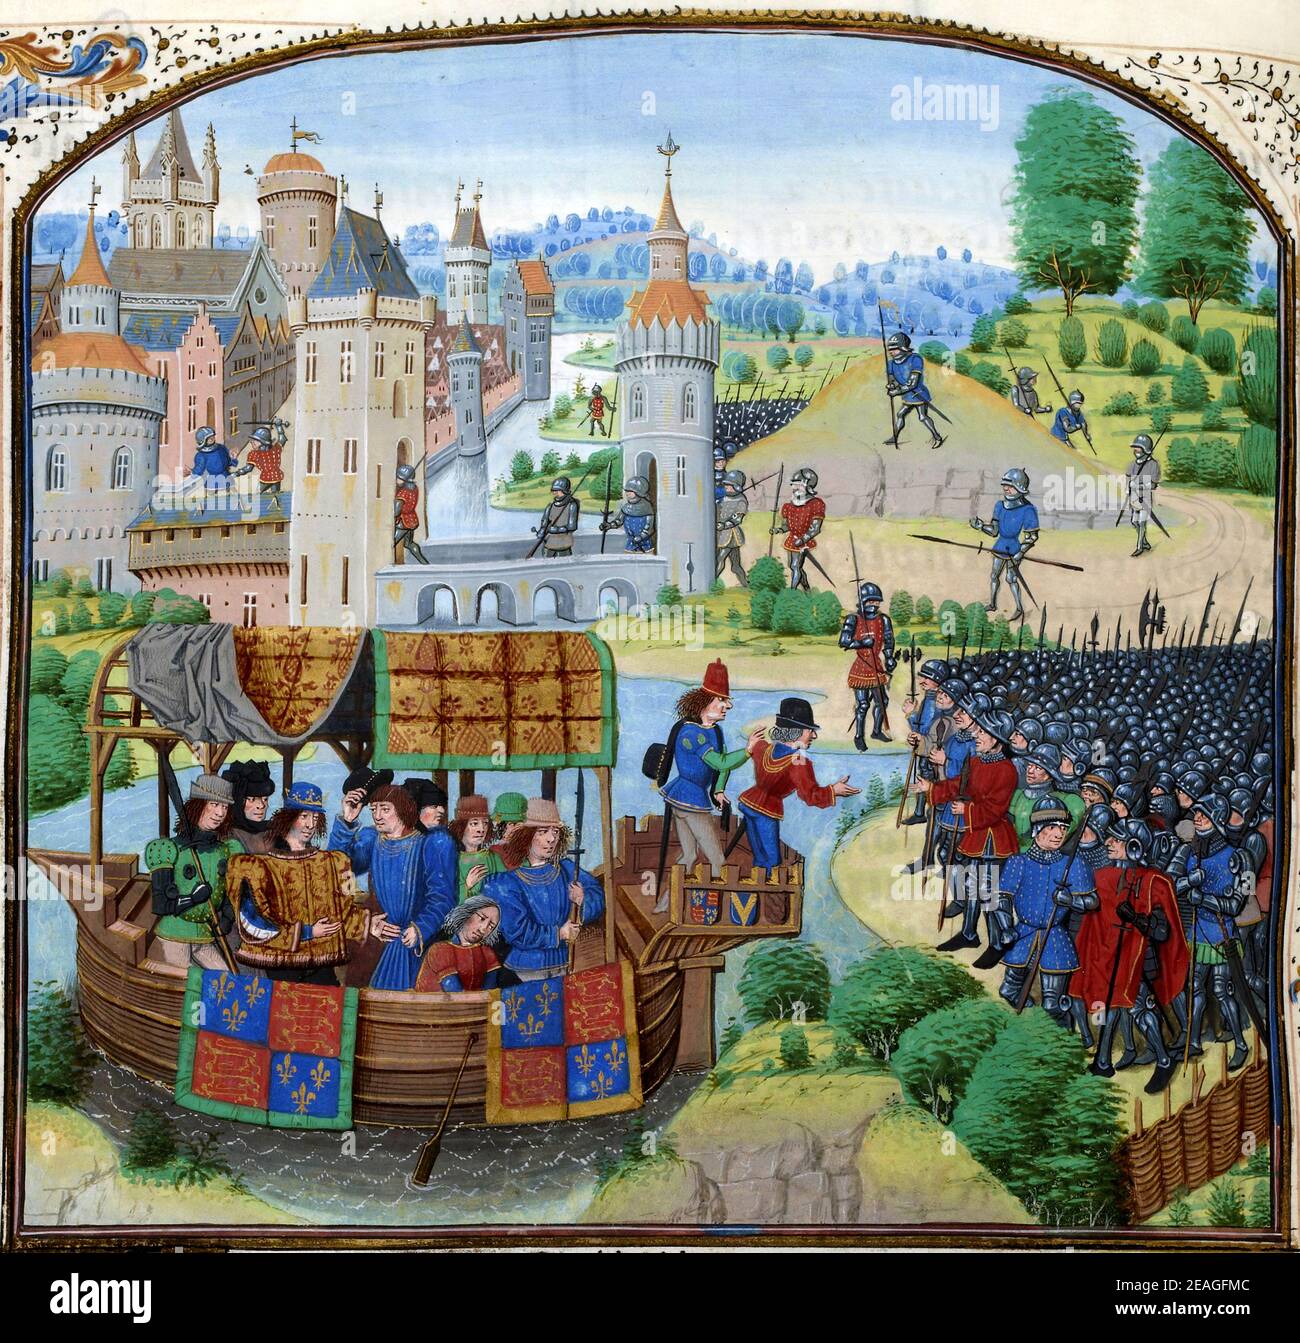 The Peasants' Revolt, also named Wat Tyler's Rebellion or the Great Rising, was a major uprising across large parts of England in 1381. Stock Photo